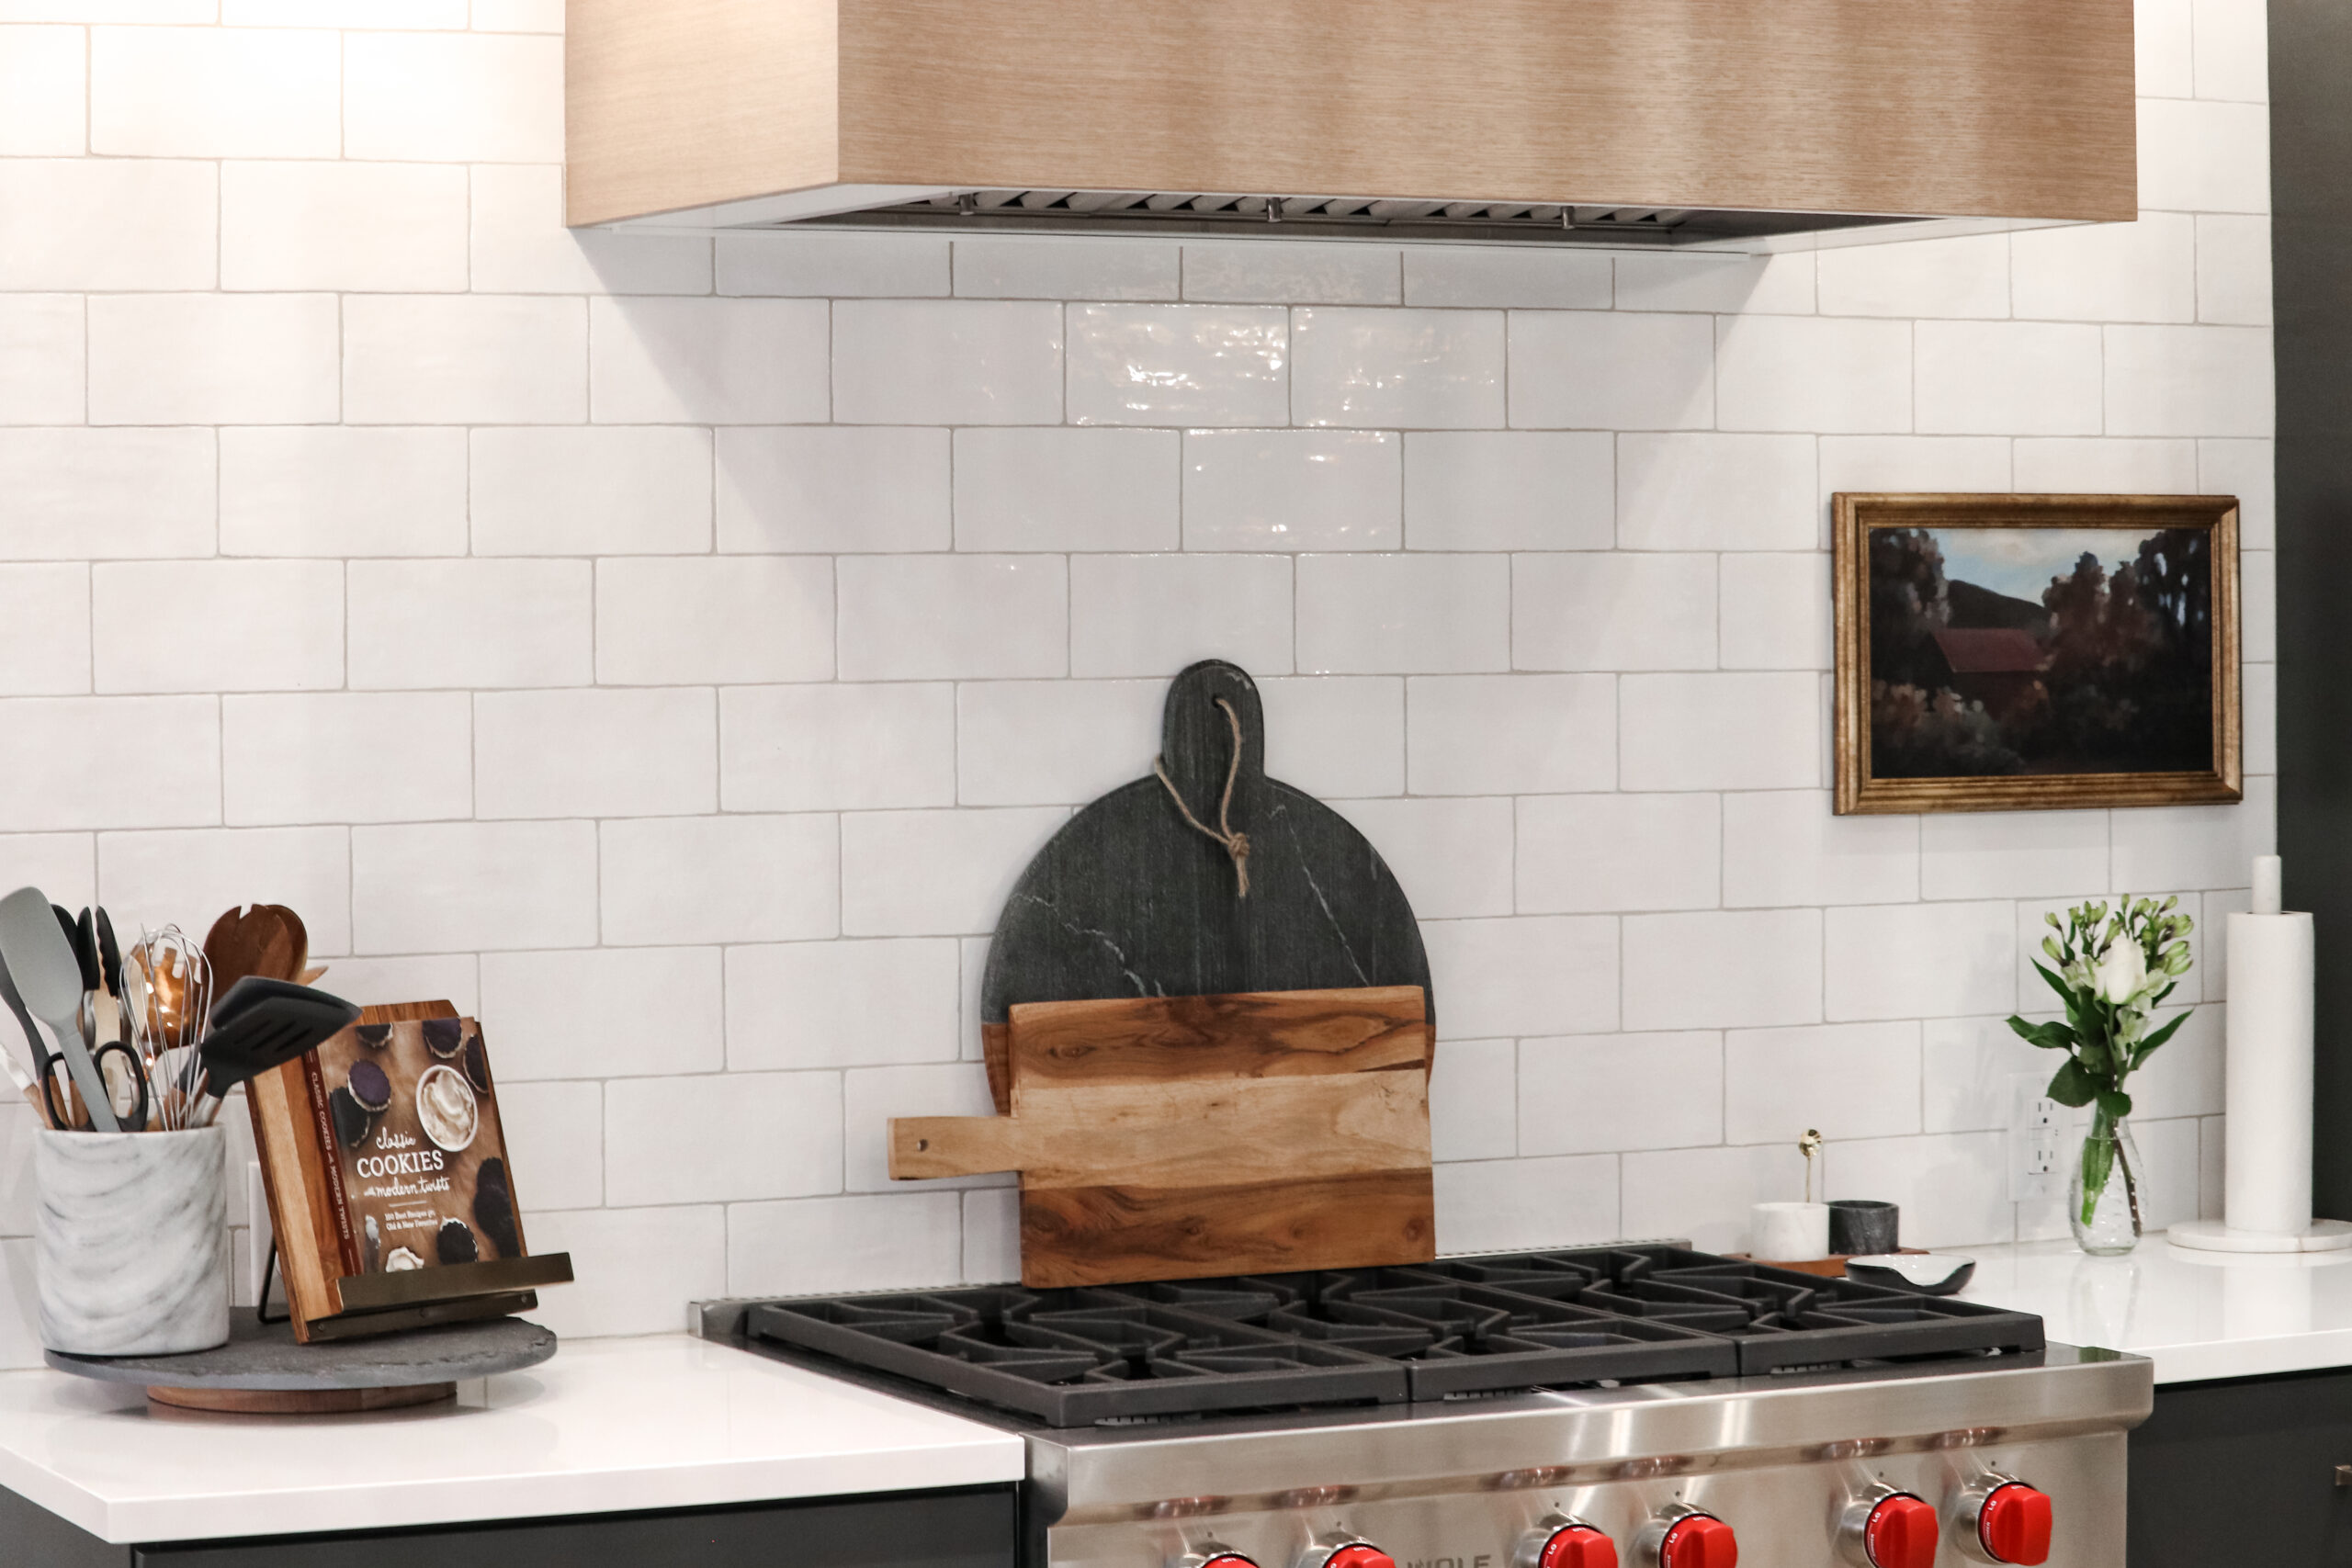 kitchen stove with cutting boards and white subway tile backsplash